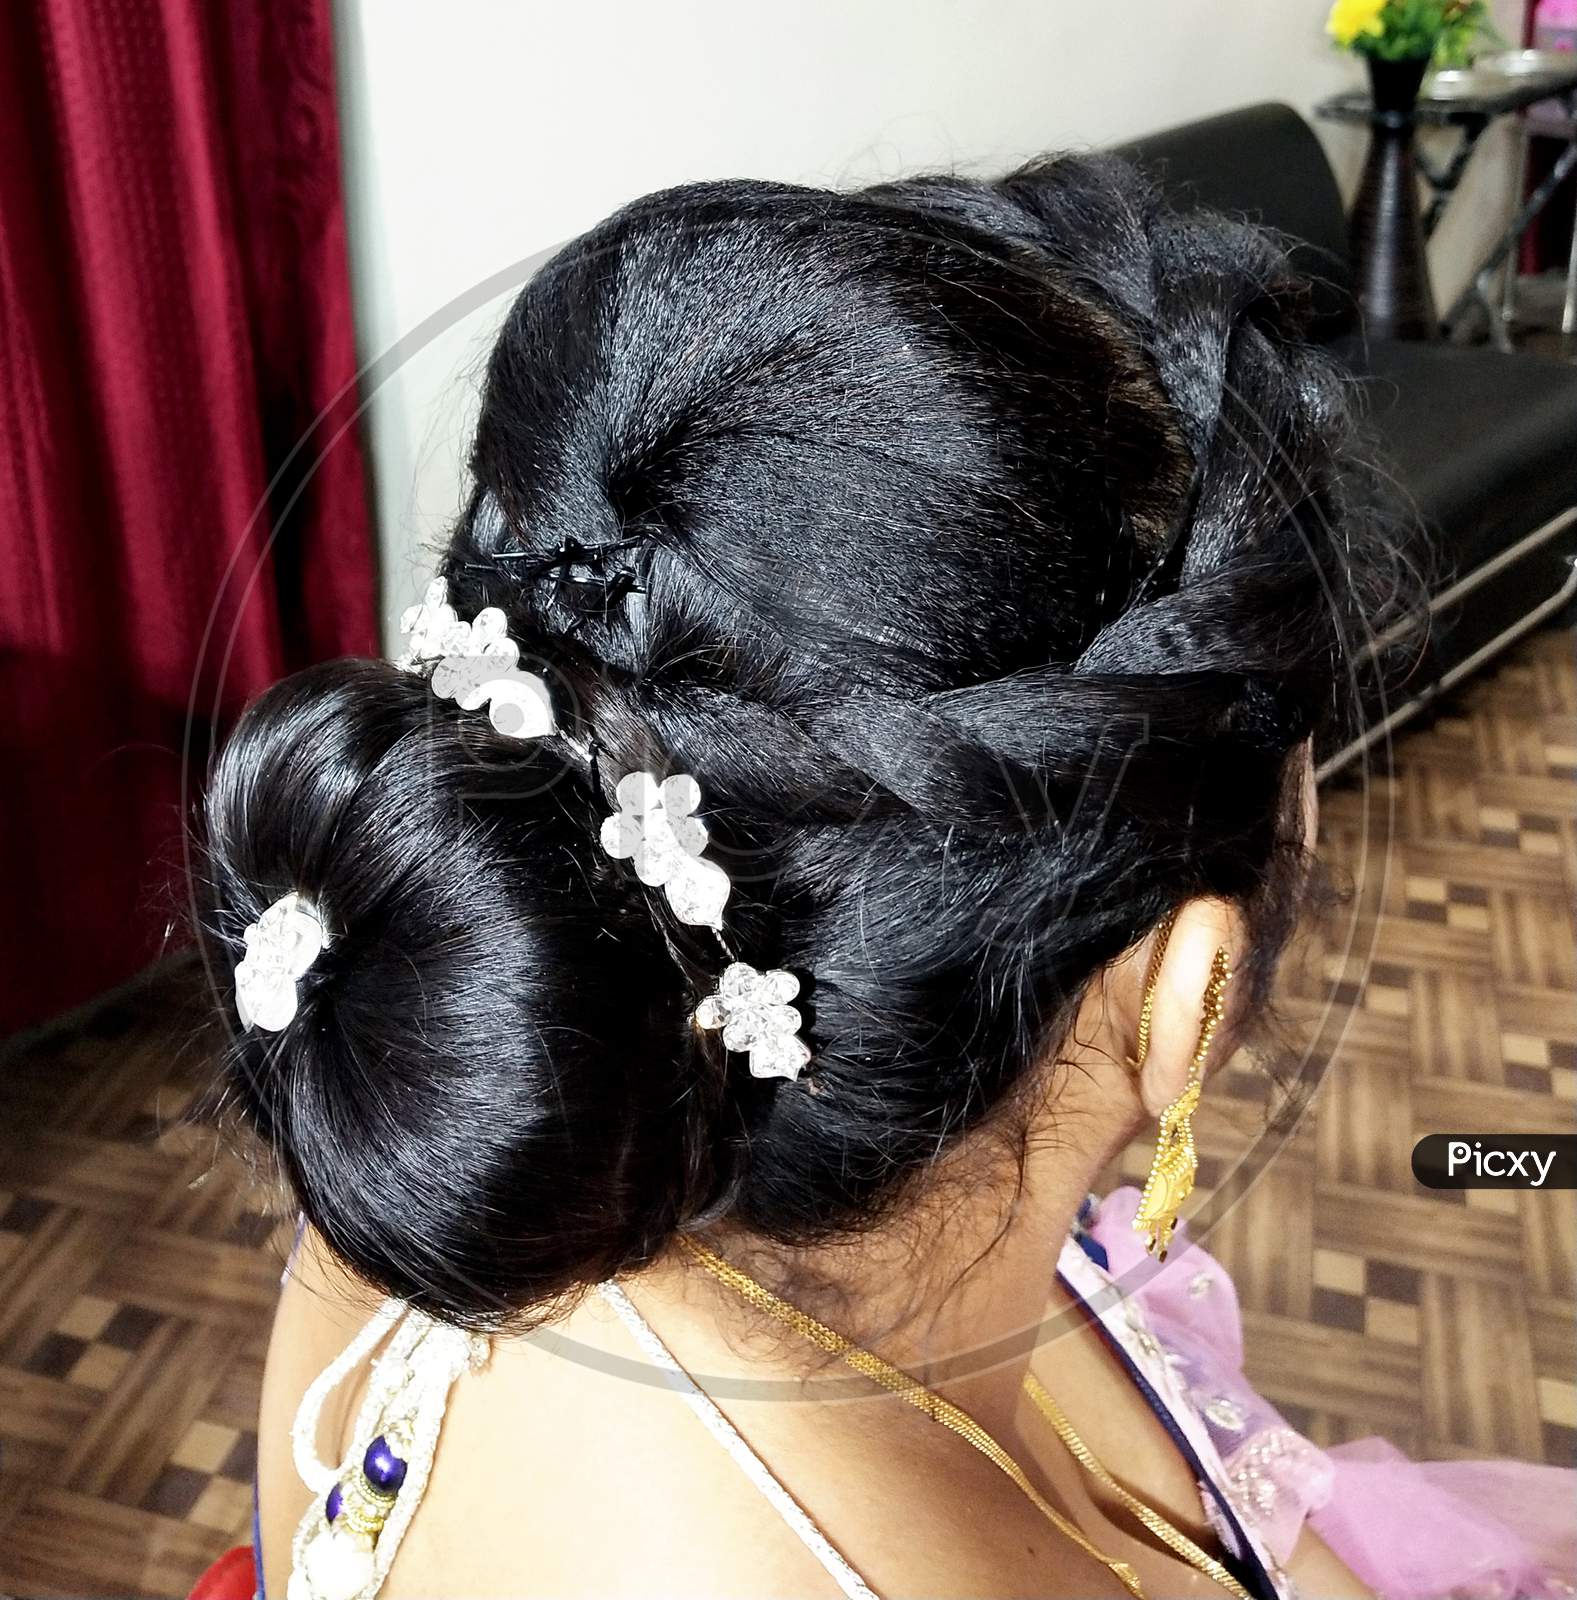 Shallow Focus Shot Of A Beautiful Hairstyle With Floral Decorations On A Brunette Female